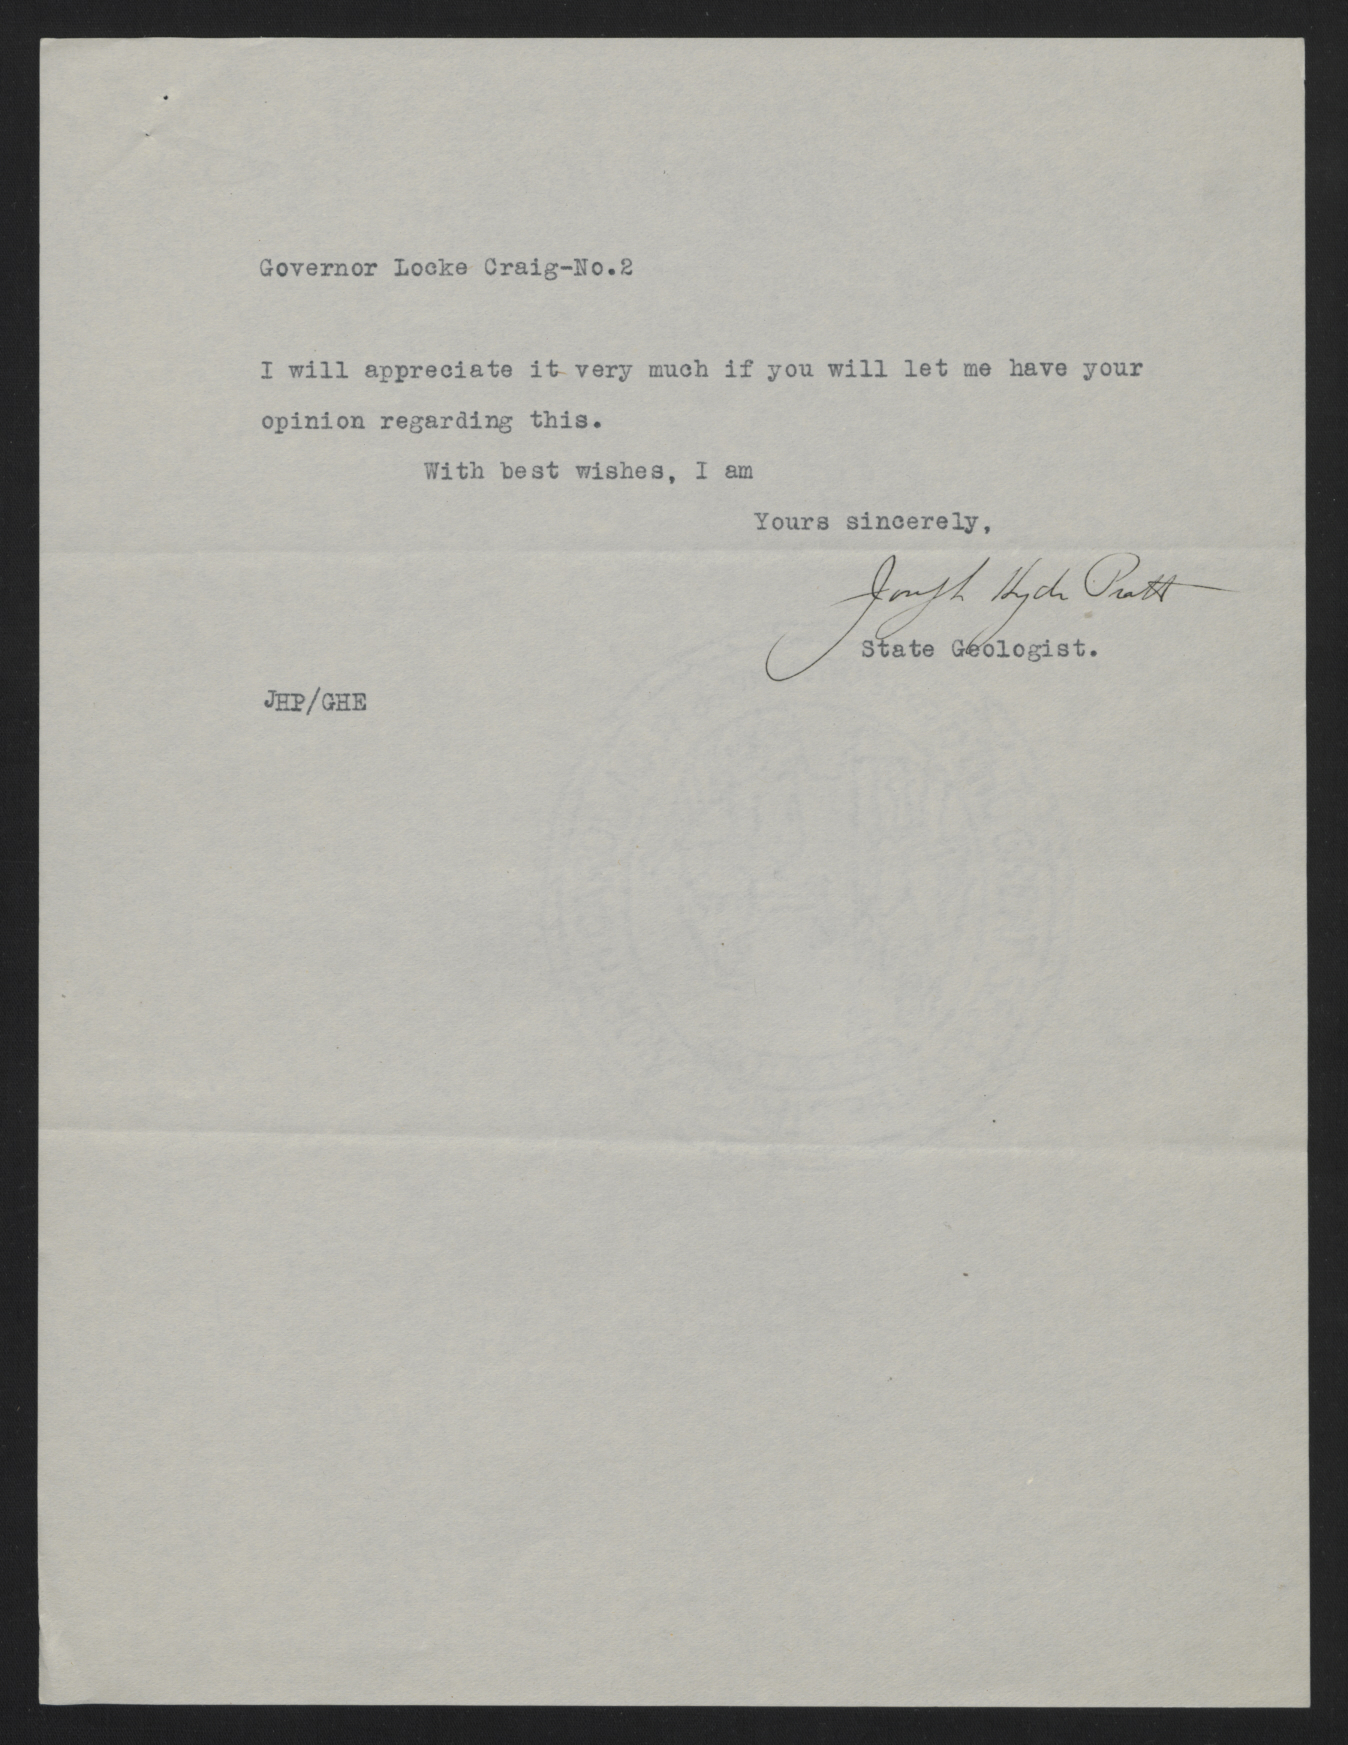 Letter from Pratt to Craig, July 15, 1913, page 2